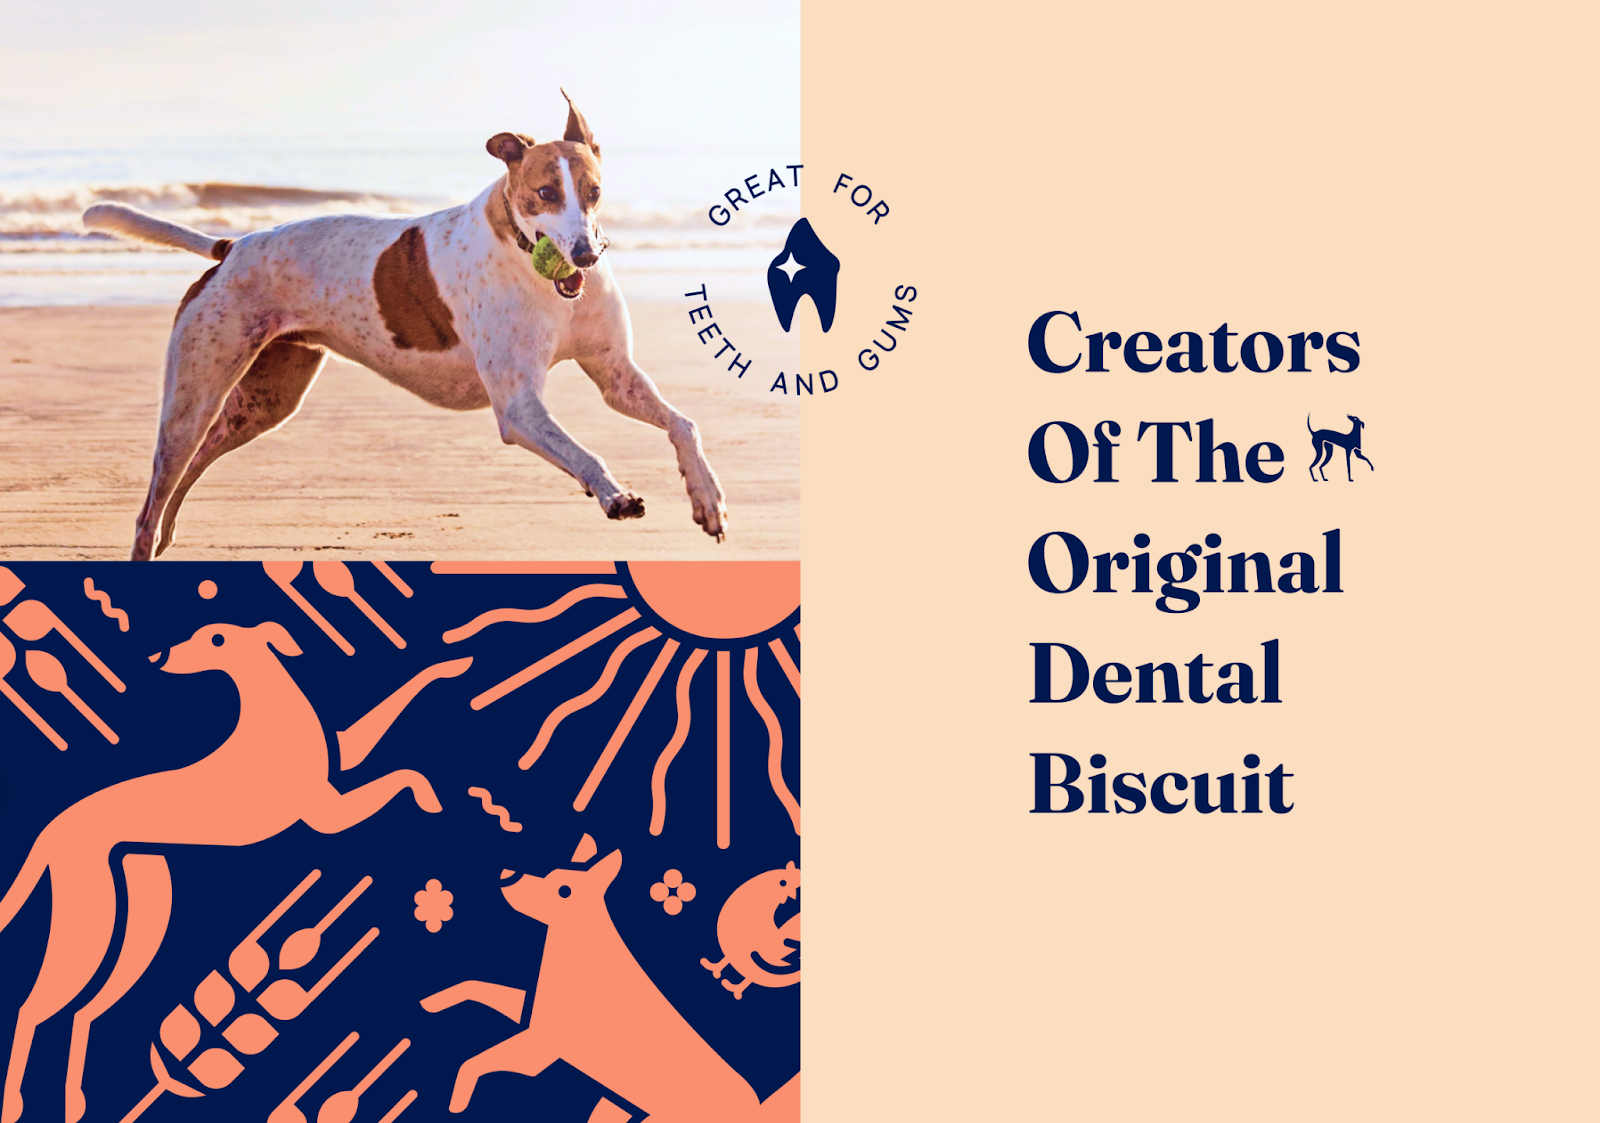 Three images combined in this screenshot: top left shows a greyhound on a beach, bottom left shows how Farrell's icons can be used together, image on right displays the text 'Creators of the Original Dental Biscuit'.